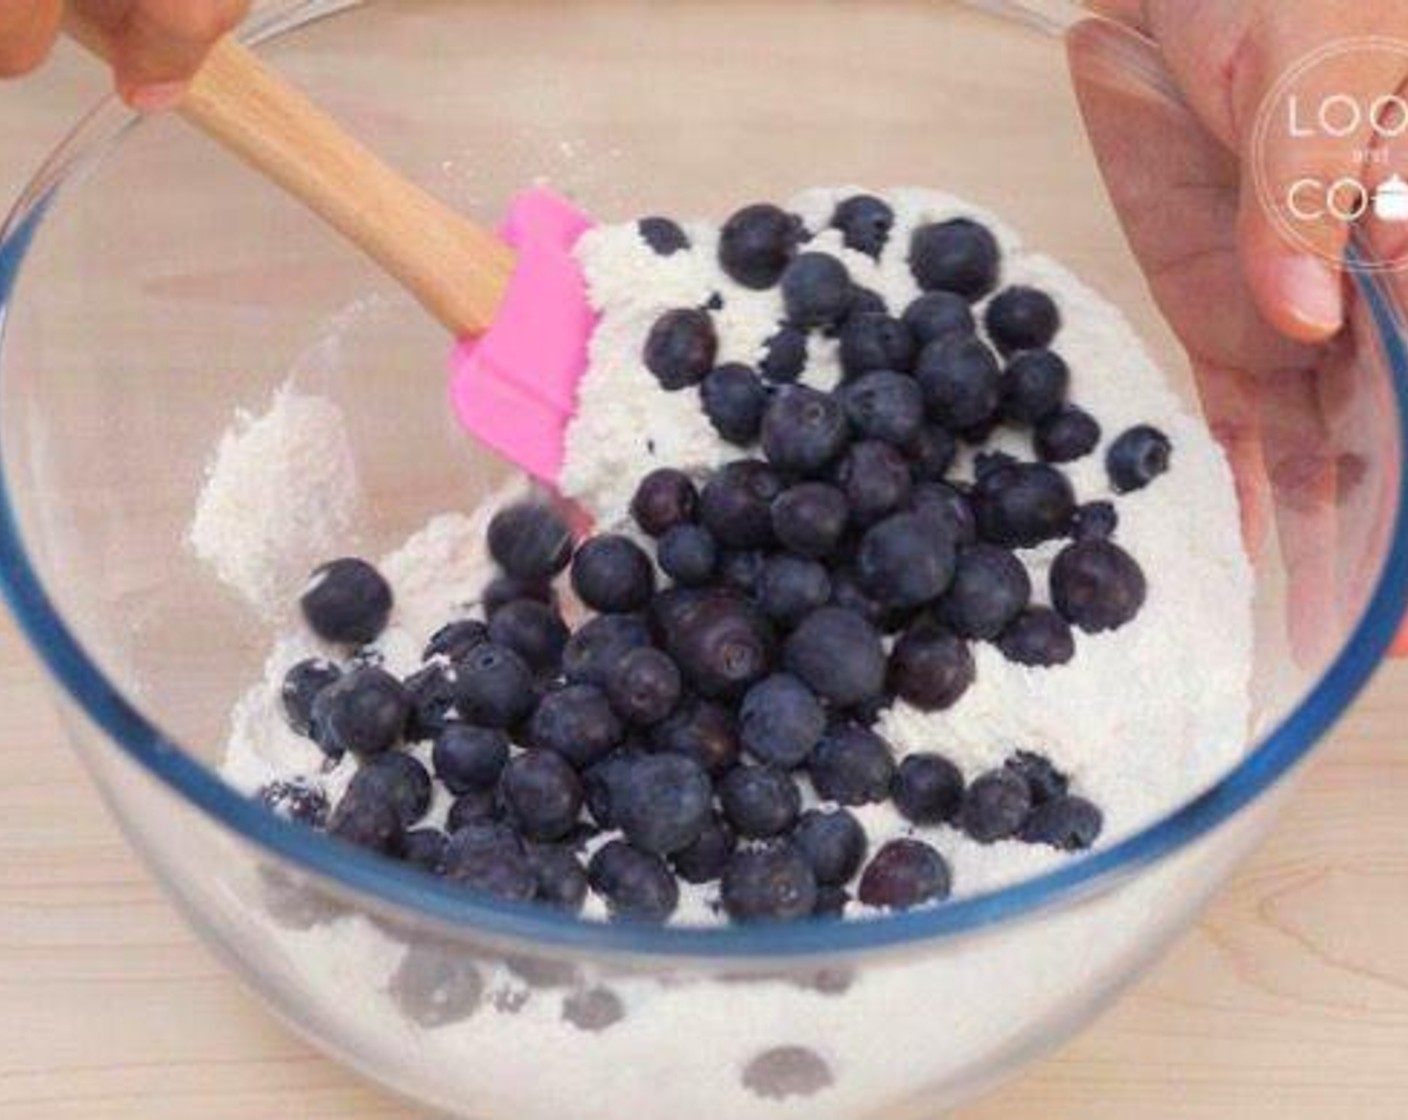 step 3 In a new large bowl add All-Purpose Flour (2 cups), Granulated Sugar (1/2 cup), Baking Powder (1 1/4 tsp), Baking Soda (1/2 tsp), Salt (1/4 tsp) and mix. Add the Fresh Blueberries (2 1/3 cups) and gently mix.